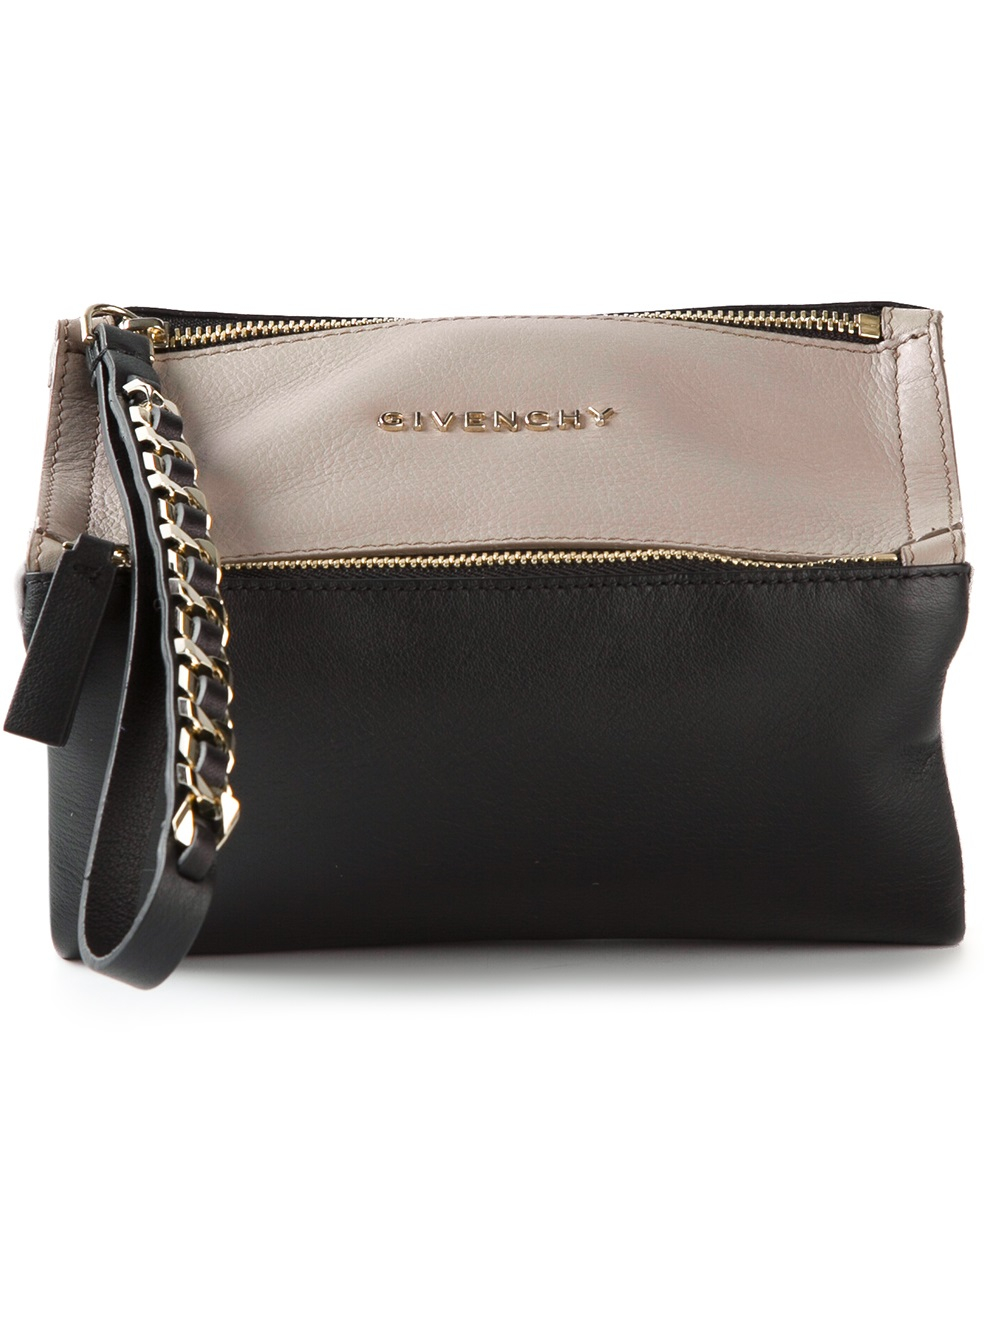 Pandora leather clutch bag Givenchy Black in Leather - 35367695